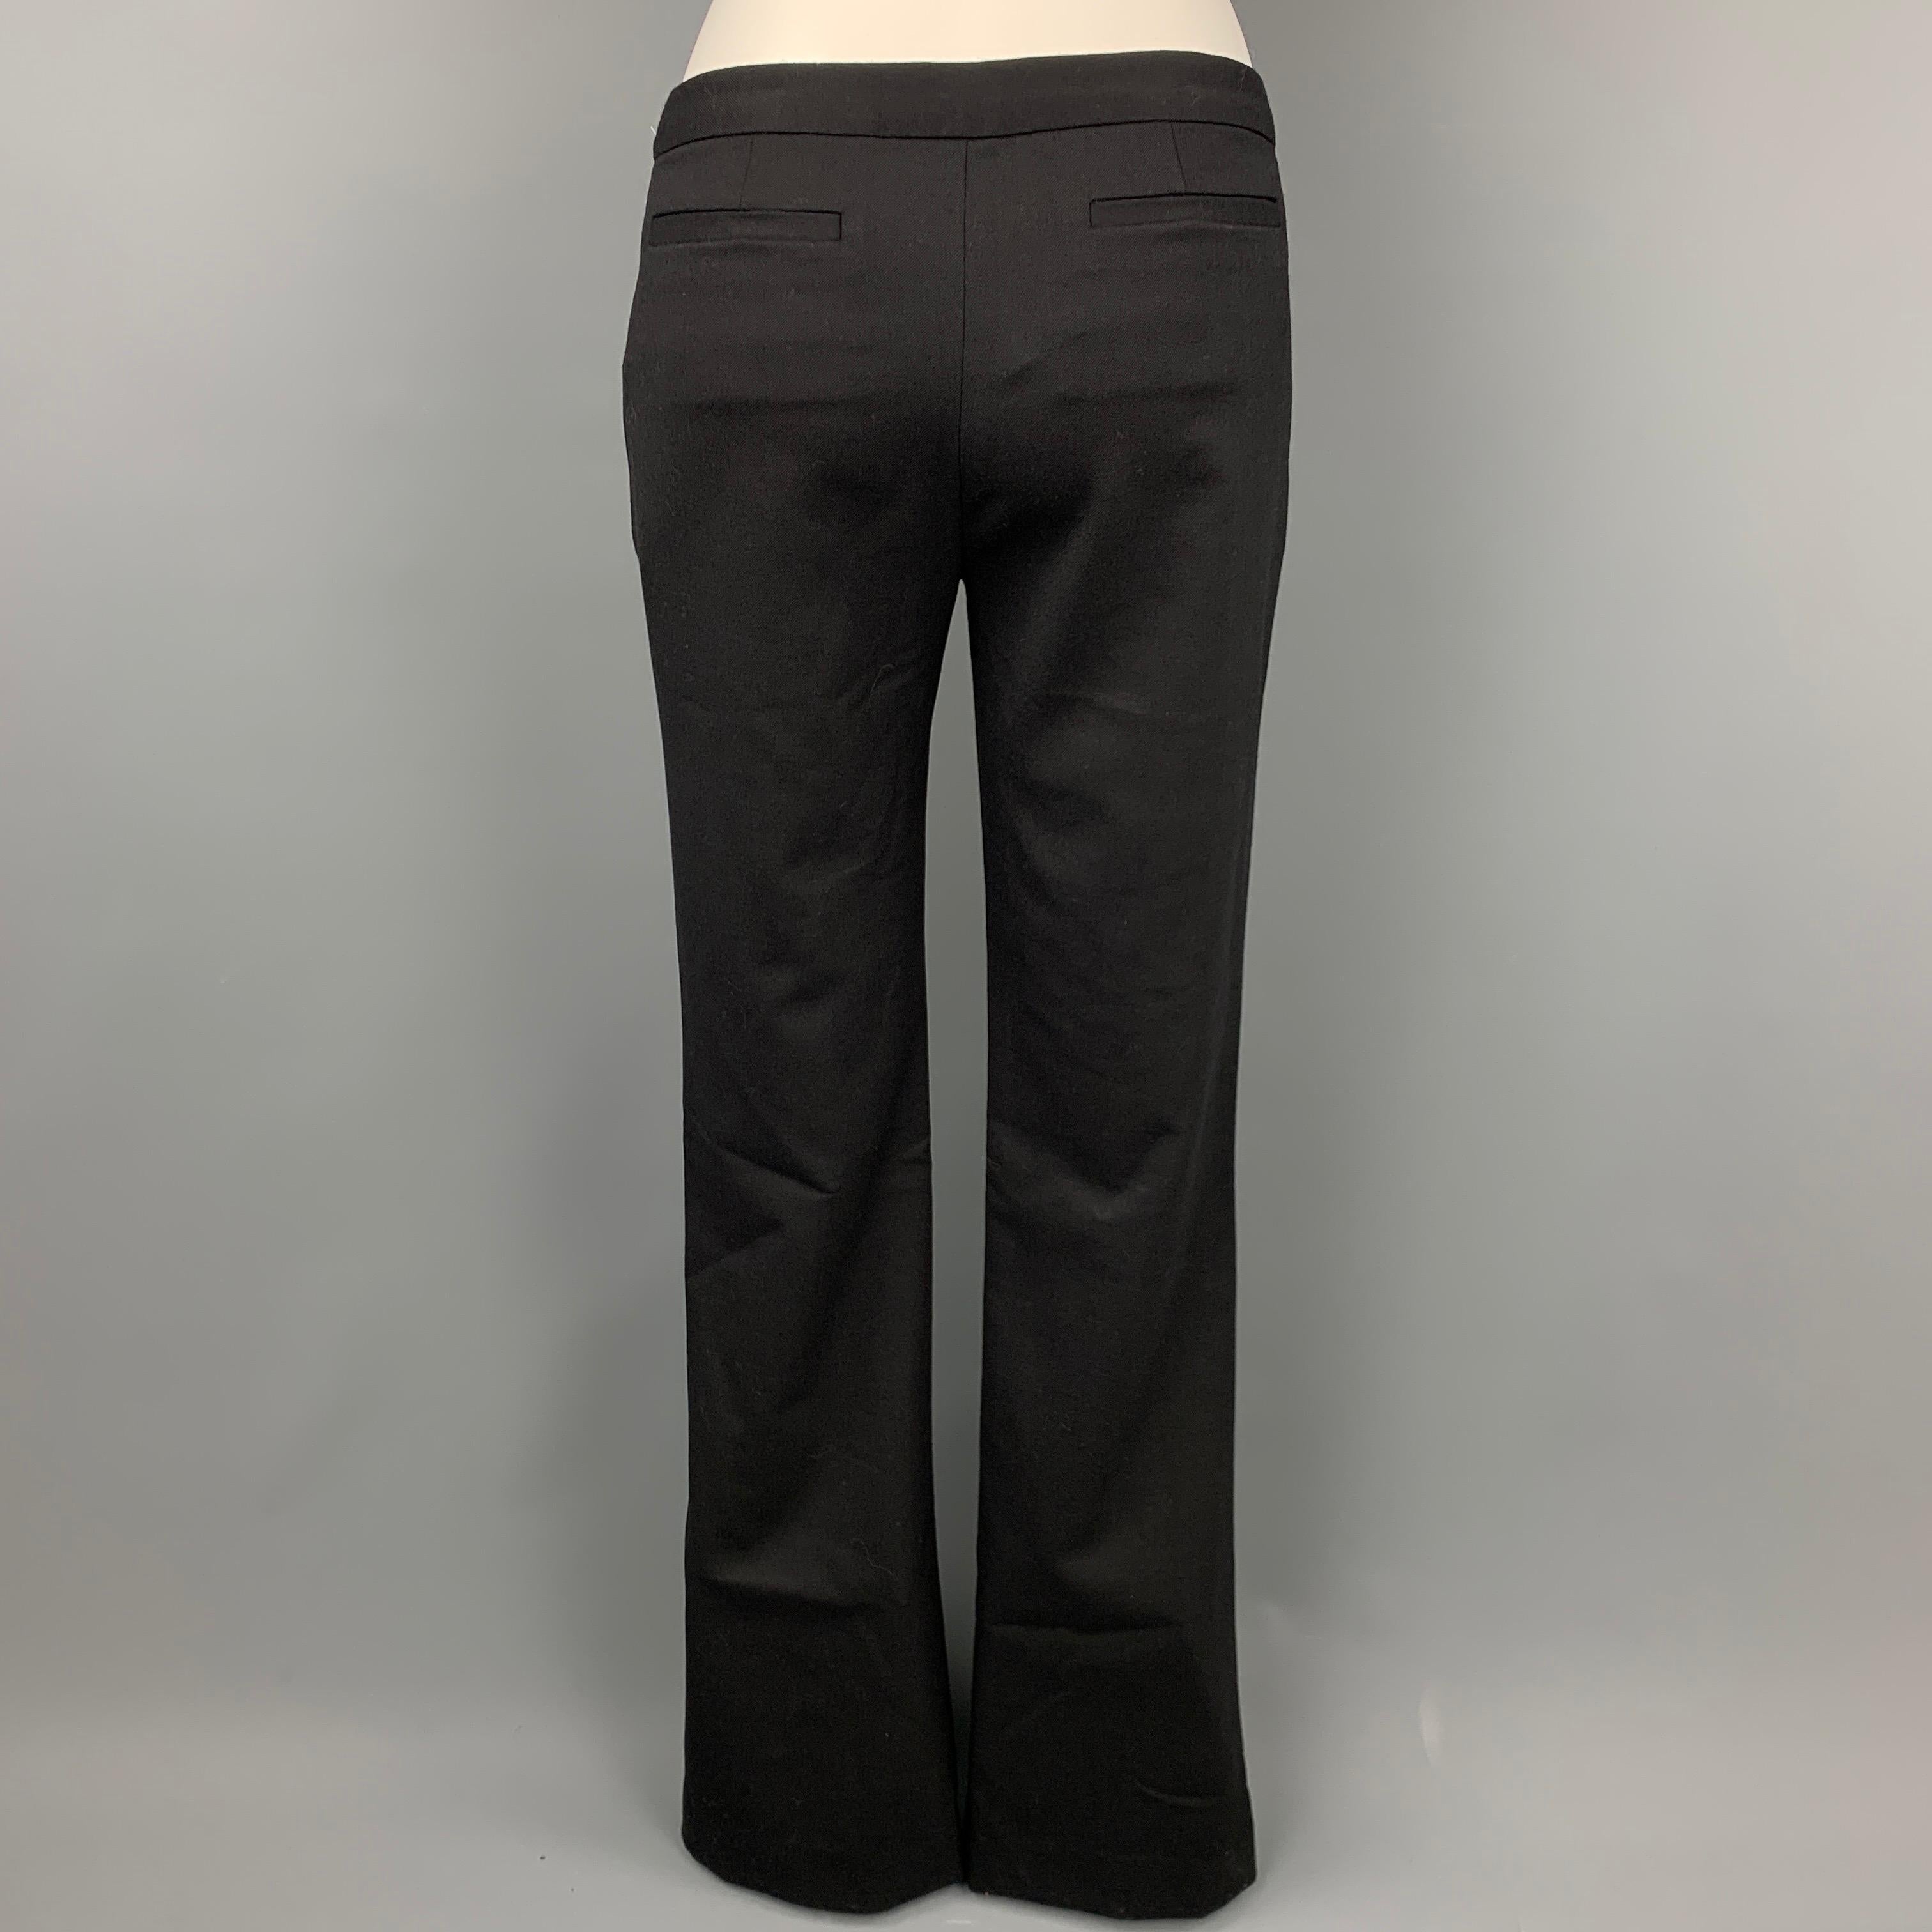 A.L.C dress pants comes in a wool blend featuring a boot cut style, front tab, and a zip fly closure. 

New With Tags. 
Marked: 6
Original Retail Price: $298.00

Measurements:

Waist: 32 in.
Rise: 8 in.
Inseam: 37 in. 